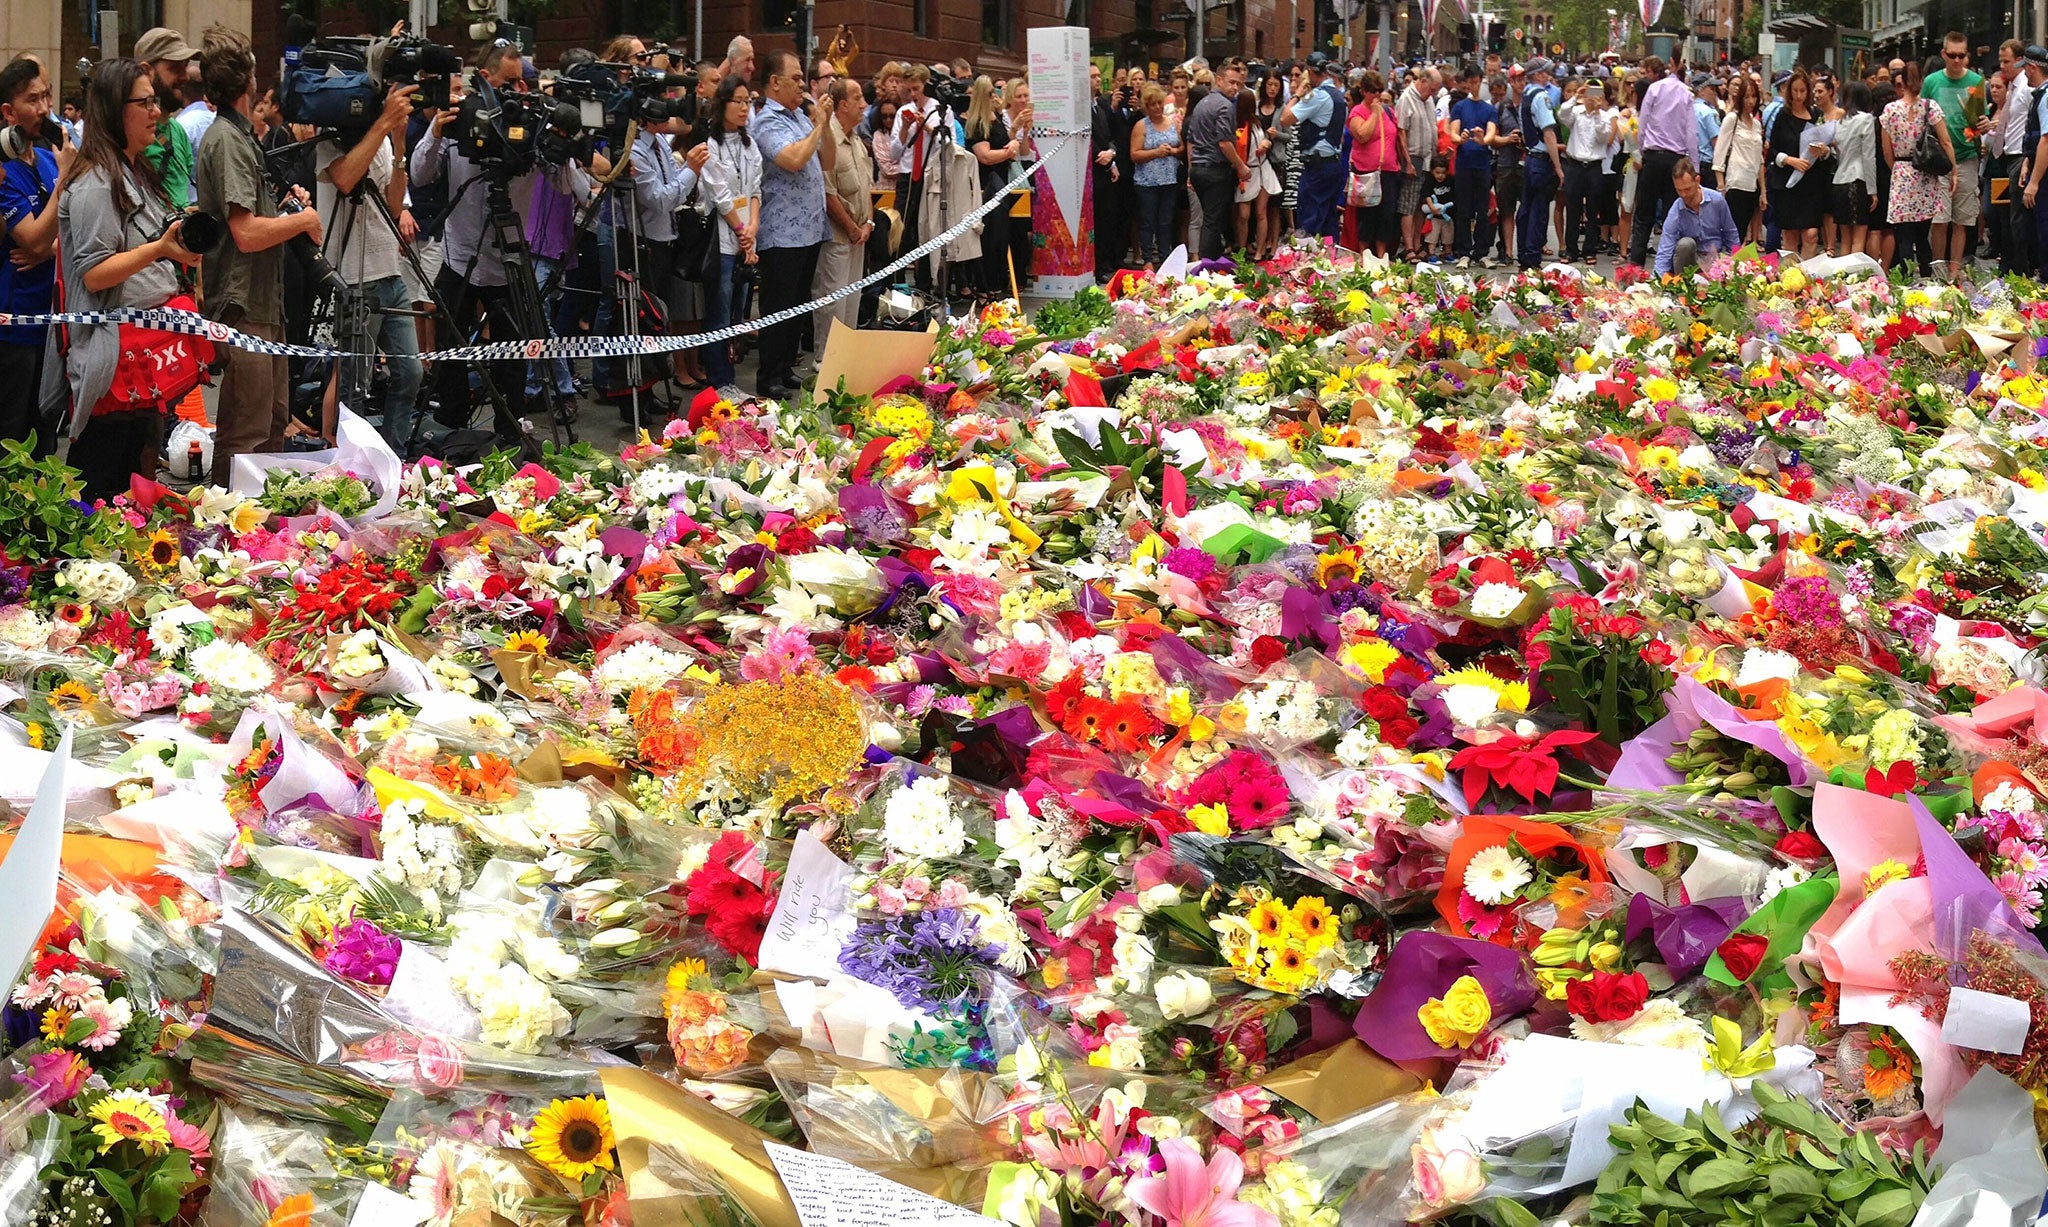 Sydneysiders visit the floral memorial for victims Tori Johnson and Katrina Dawson at the scene of the Martin Place siege in the CBD in Sydney